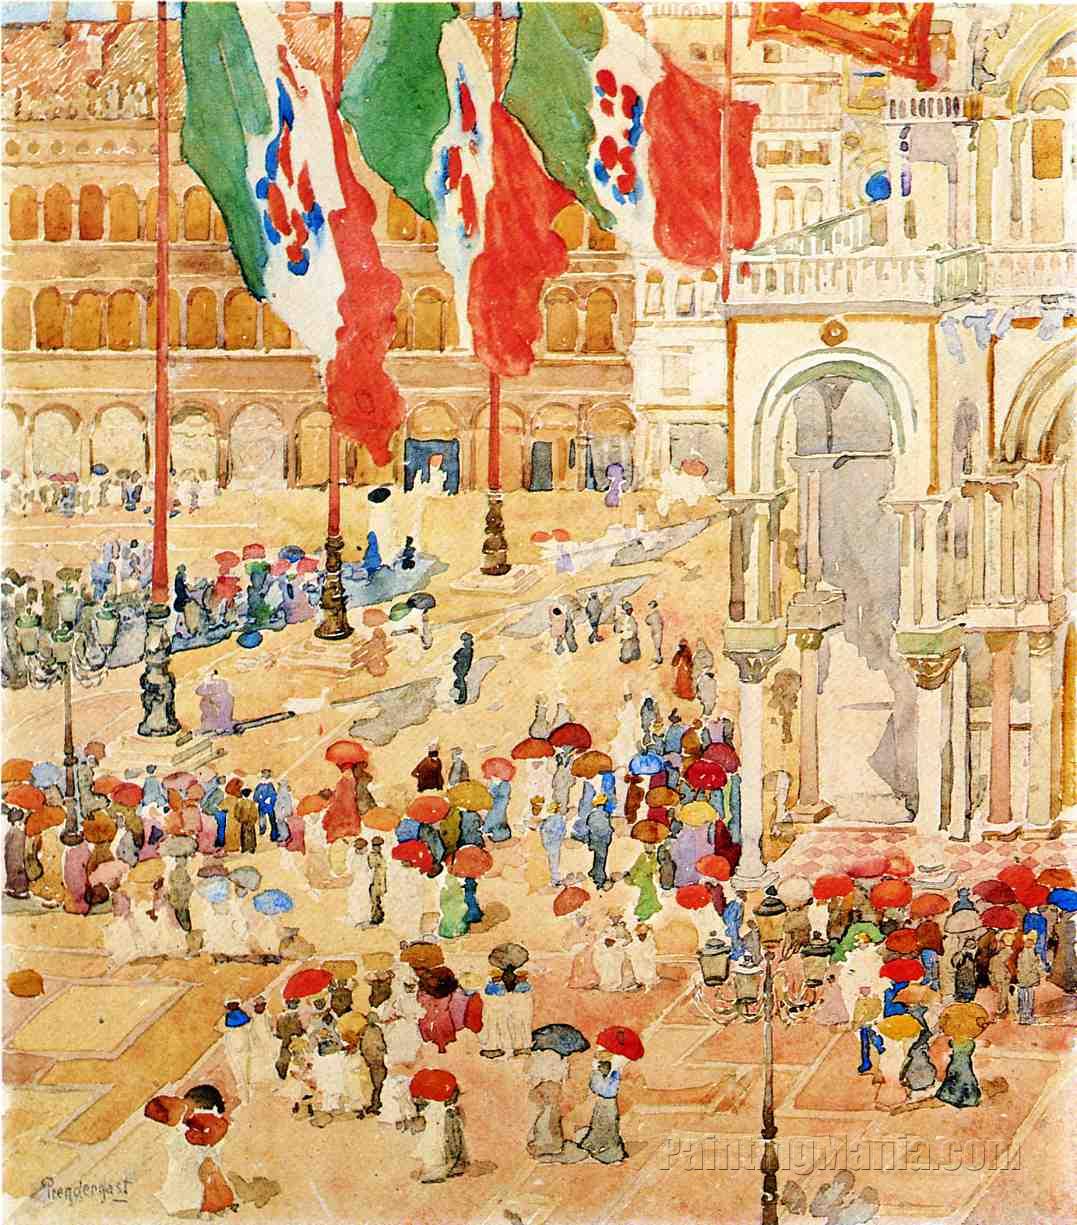 Piazza of St. Marks (The Piazza, Flags, Venice)